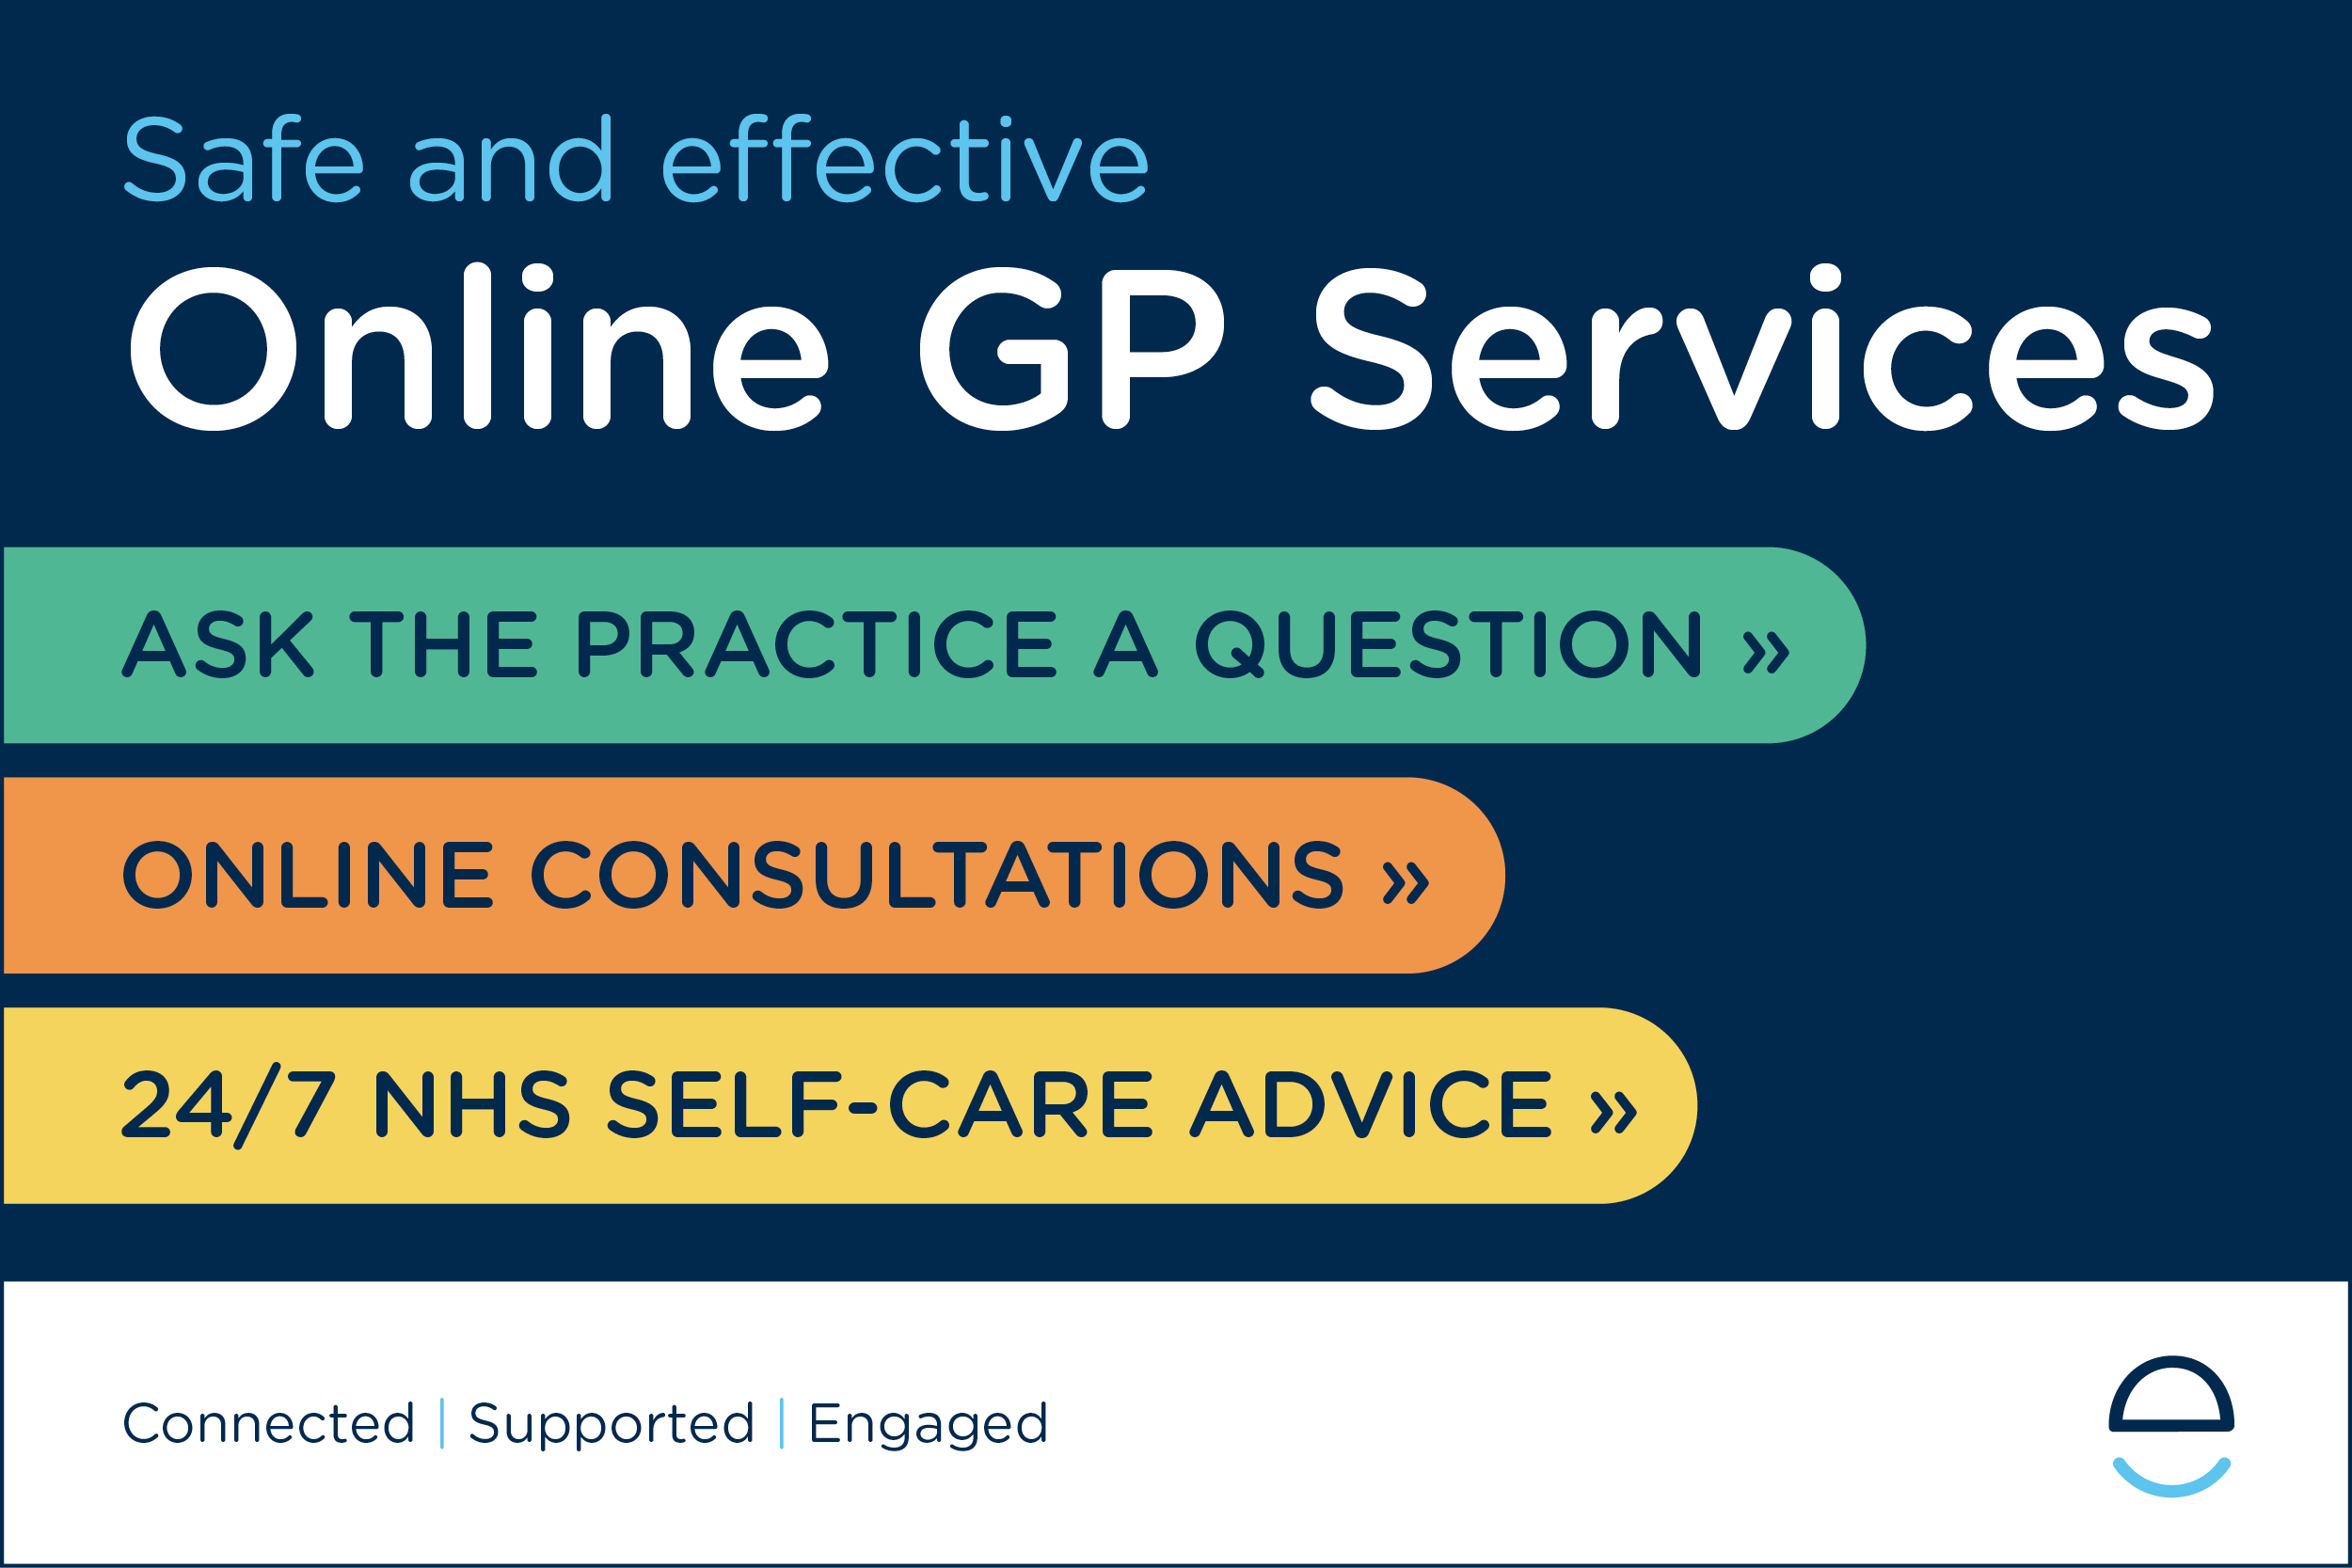 Contact your GP online